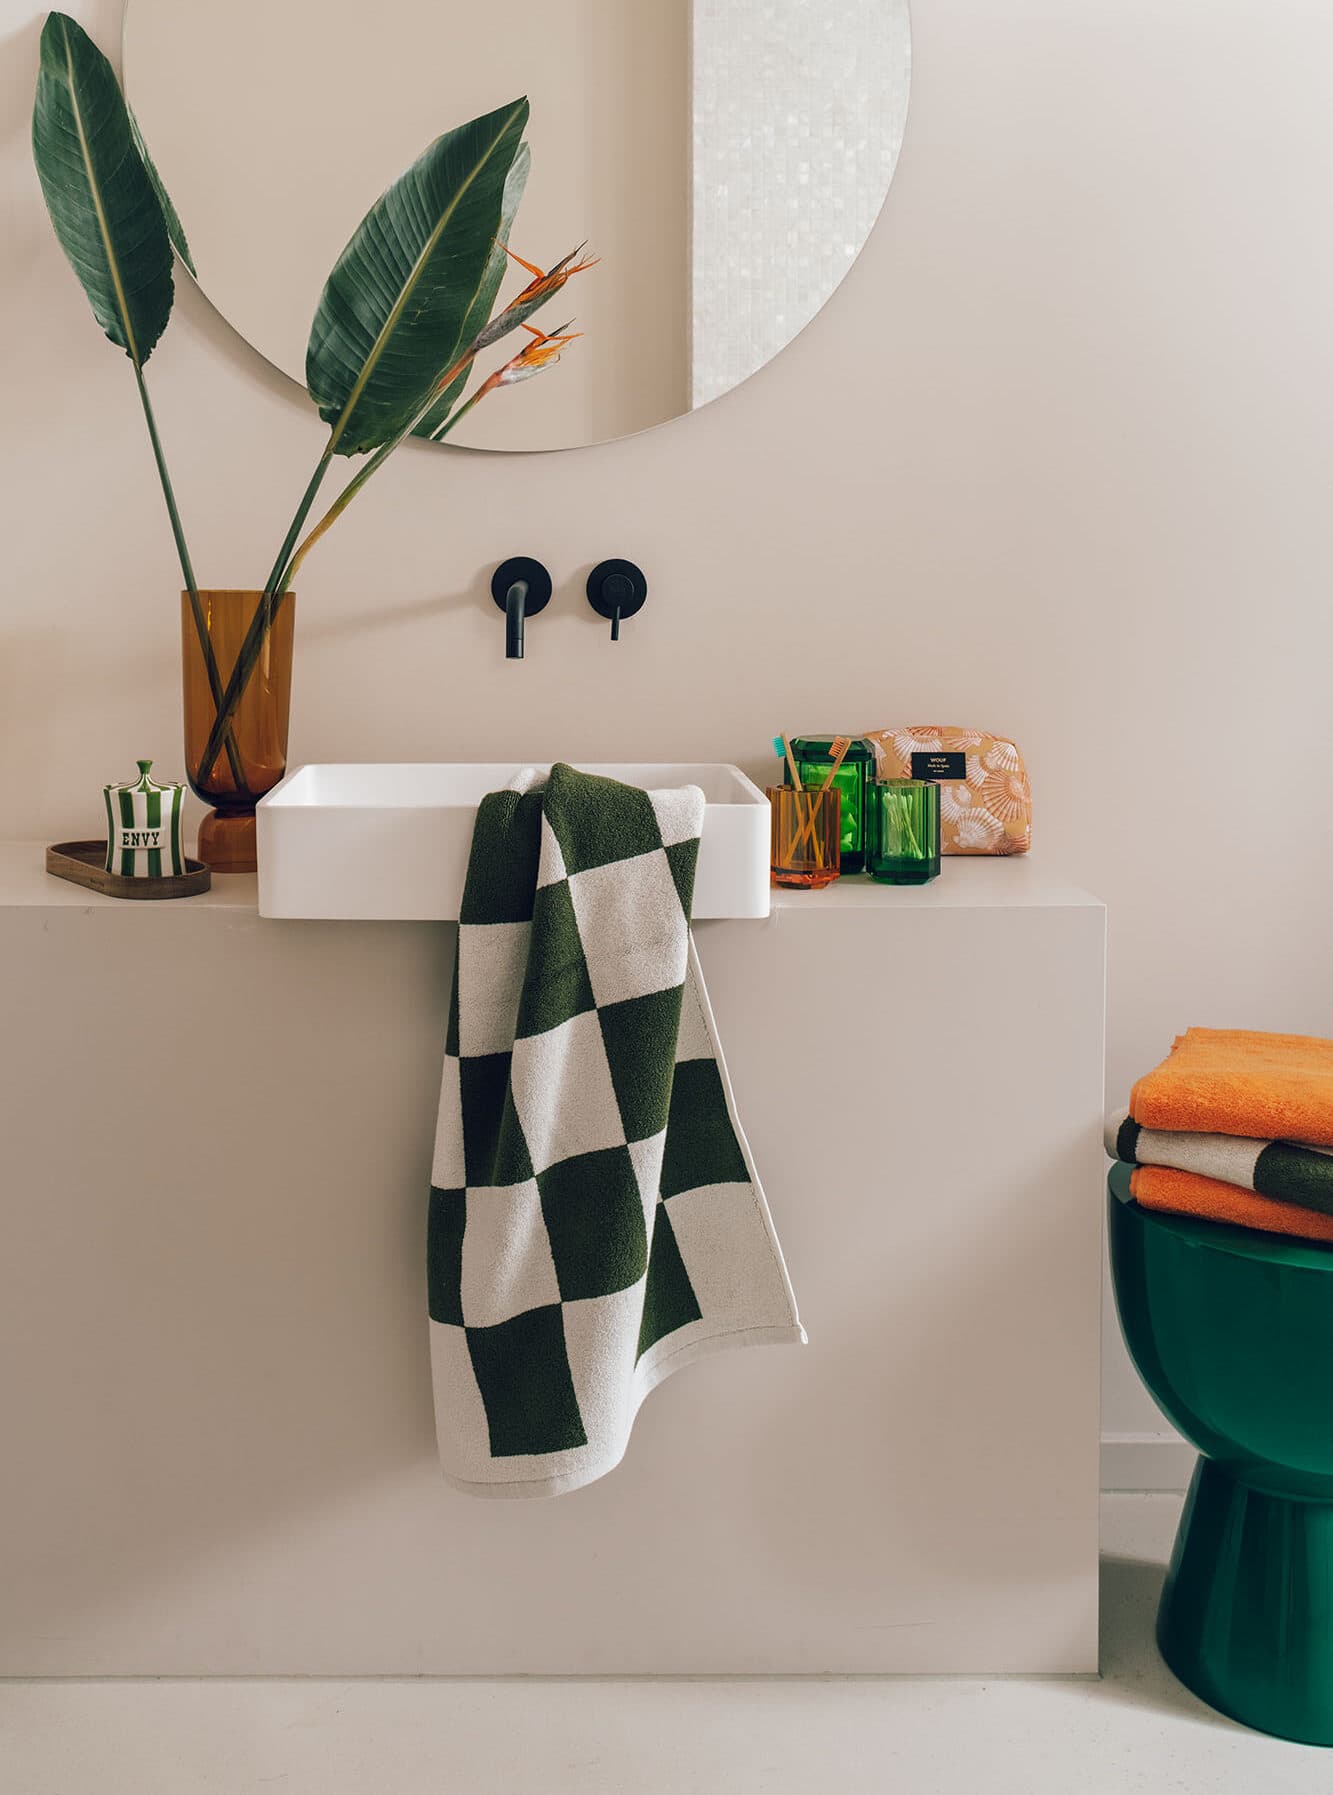 photography still life interior wall mounted sink, black wall faucet, dark green and white checkered towel round mirror green porcelain seat orange towels